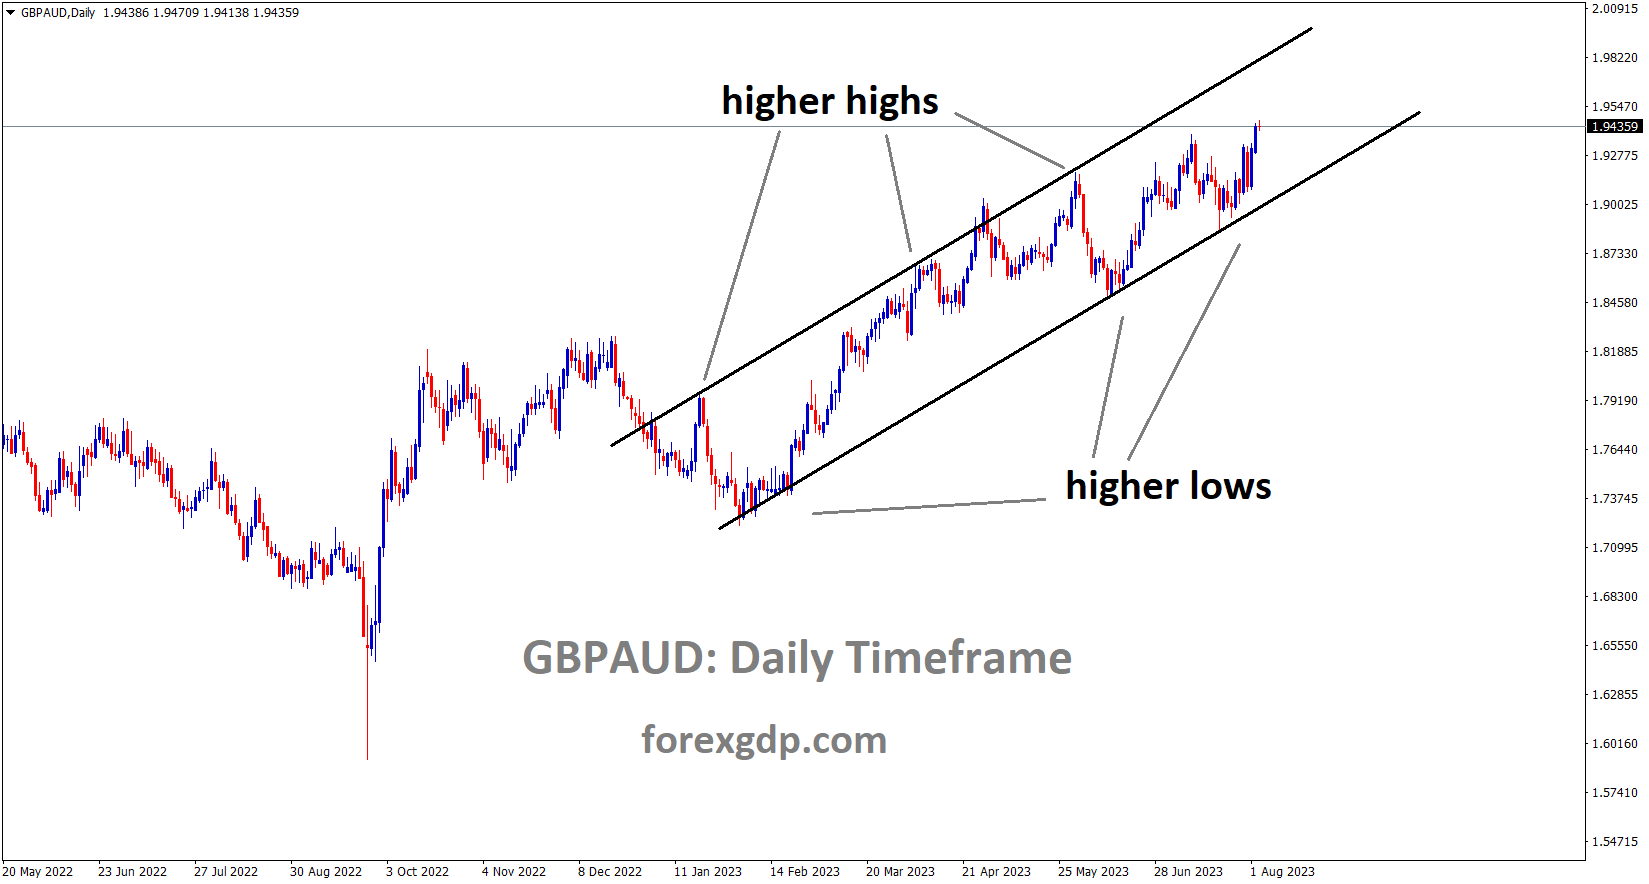 GBPAUD is moving in an Ascending channel and the market has rebounded from the higher low area of the channel